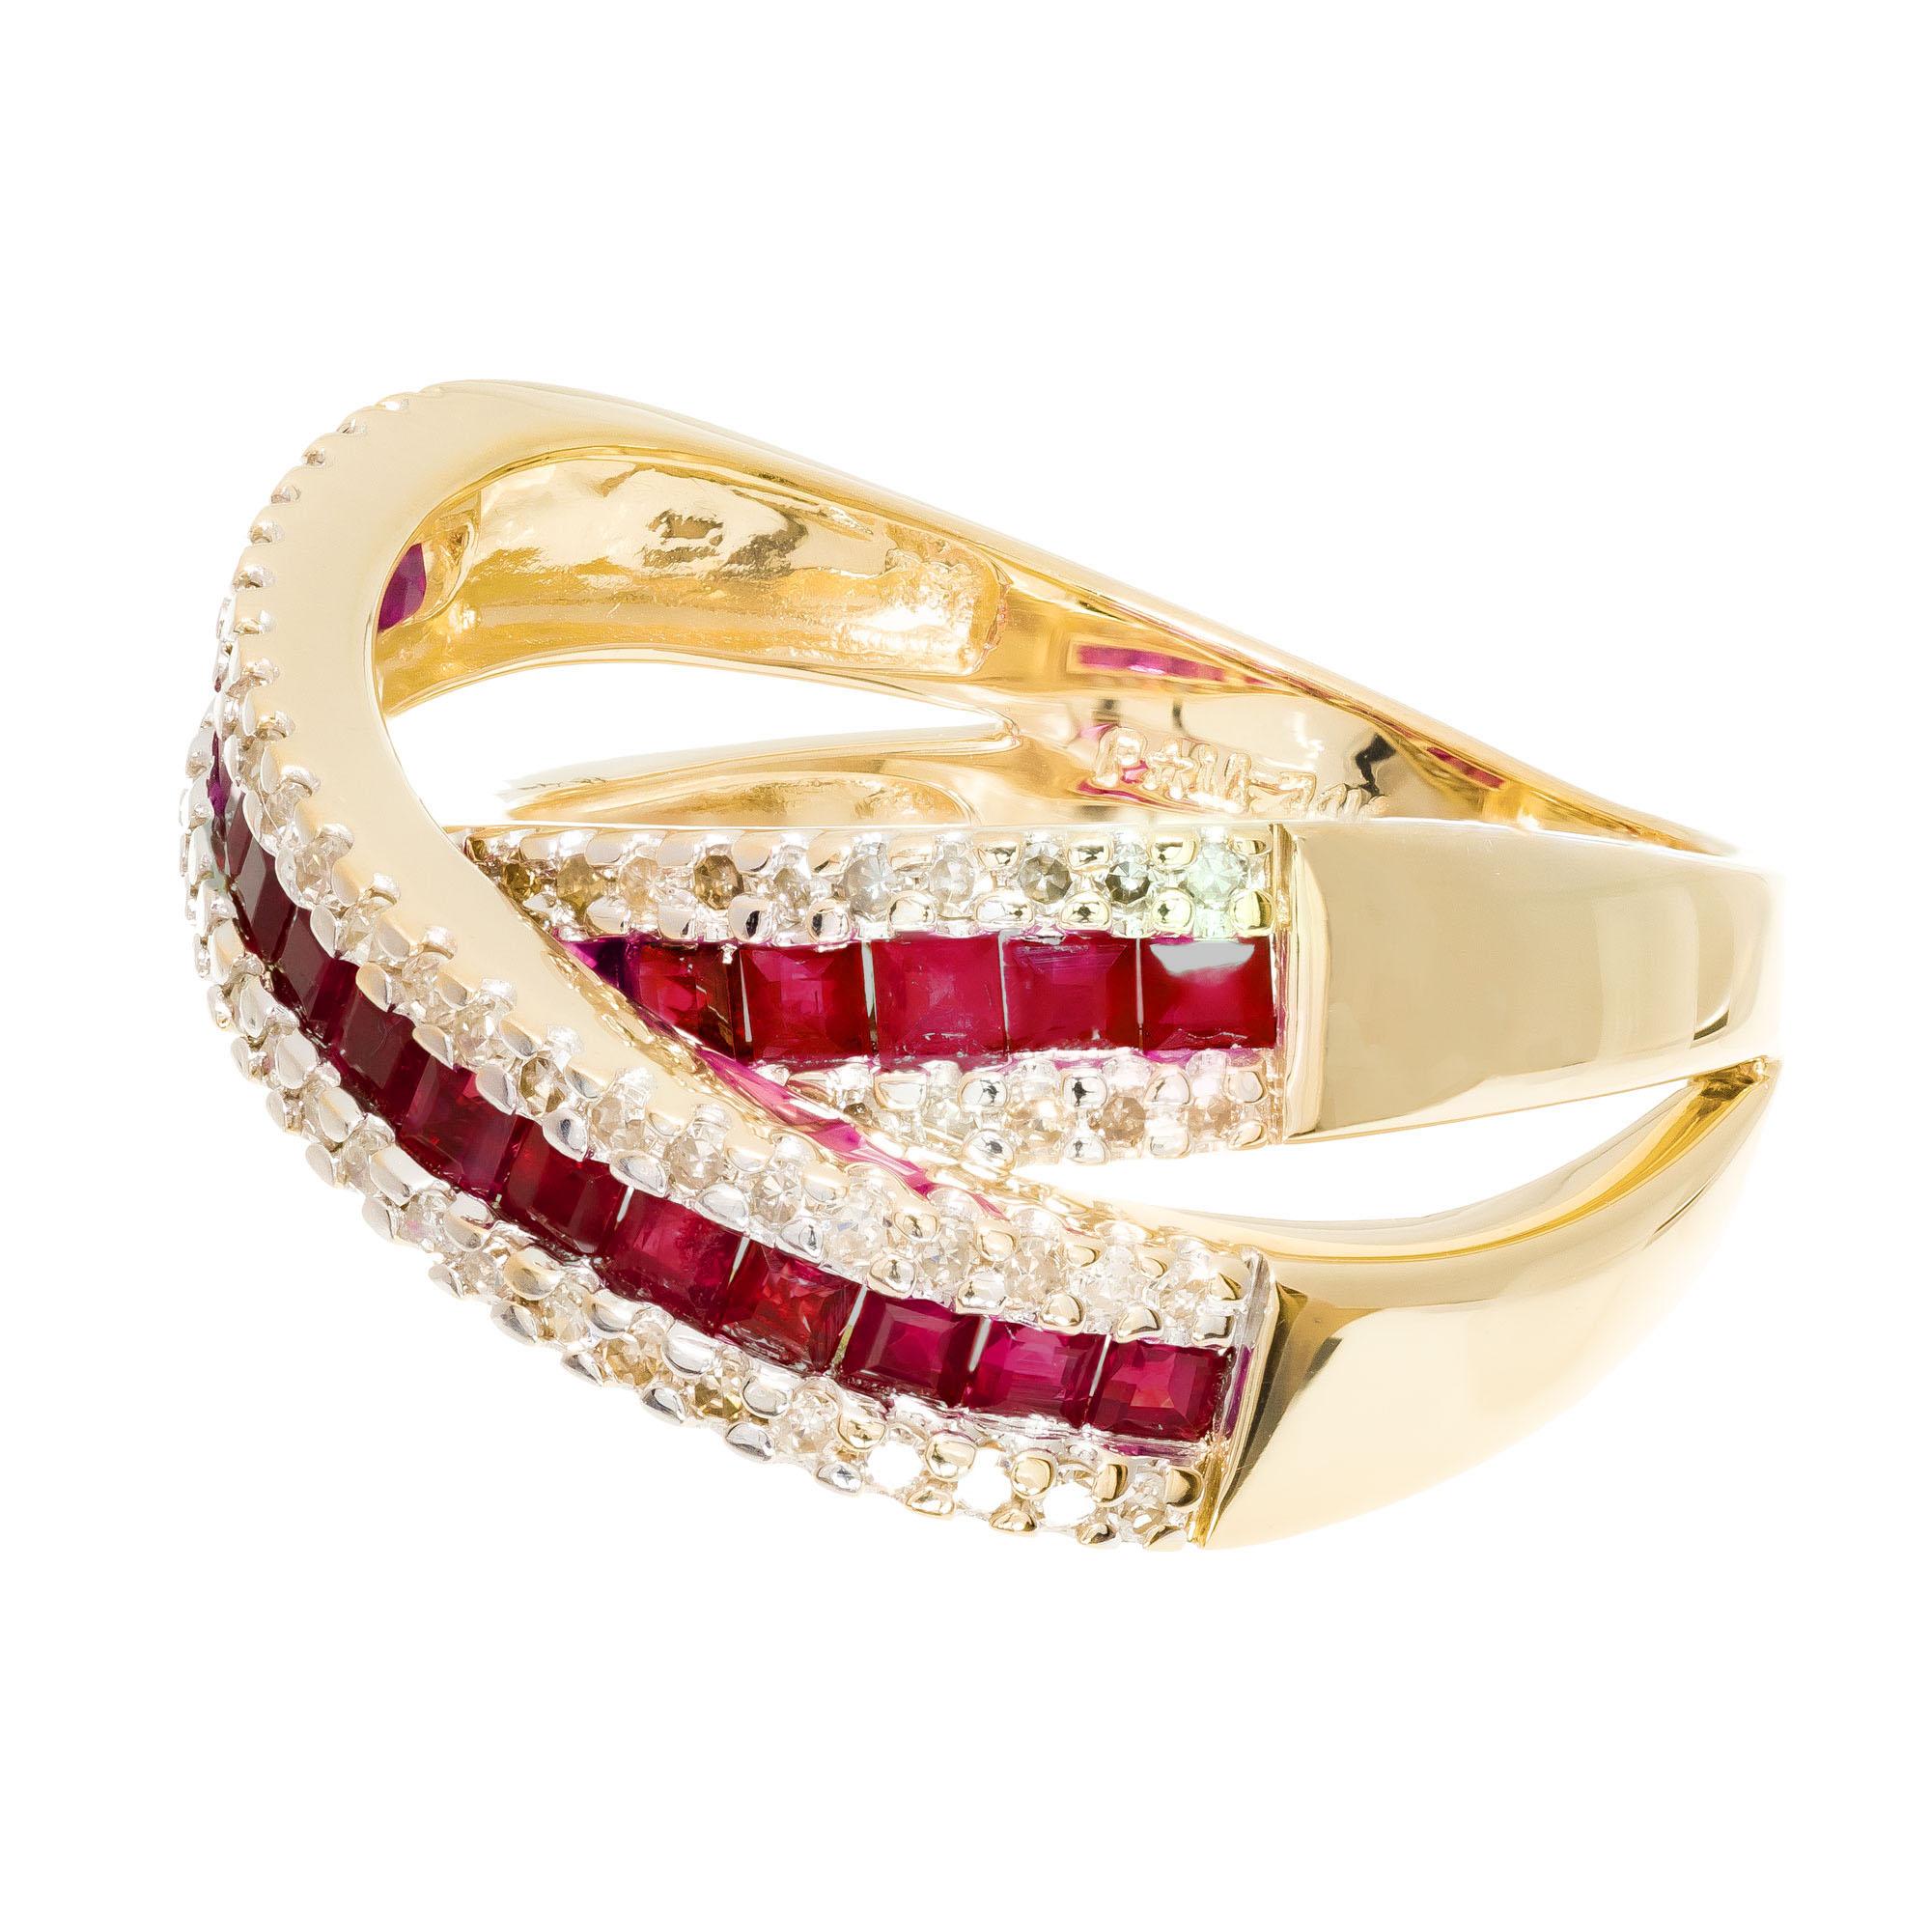 Ruby and diamond cross over band ring. 24 square cut rubies with 66 round diamonds in a 14k yellow gold setting.  

24 square red Rubies, approx. total weight .60cts, SI, 1.93 x 1.86mm
66 round Diamonds, approx. total weight .25cts, I, SI – I
Size 7